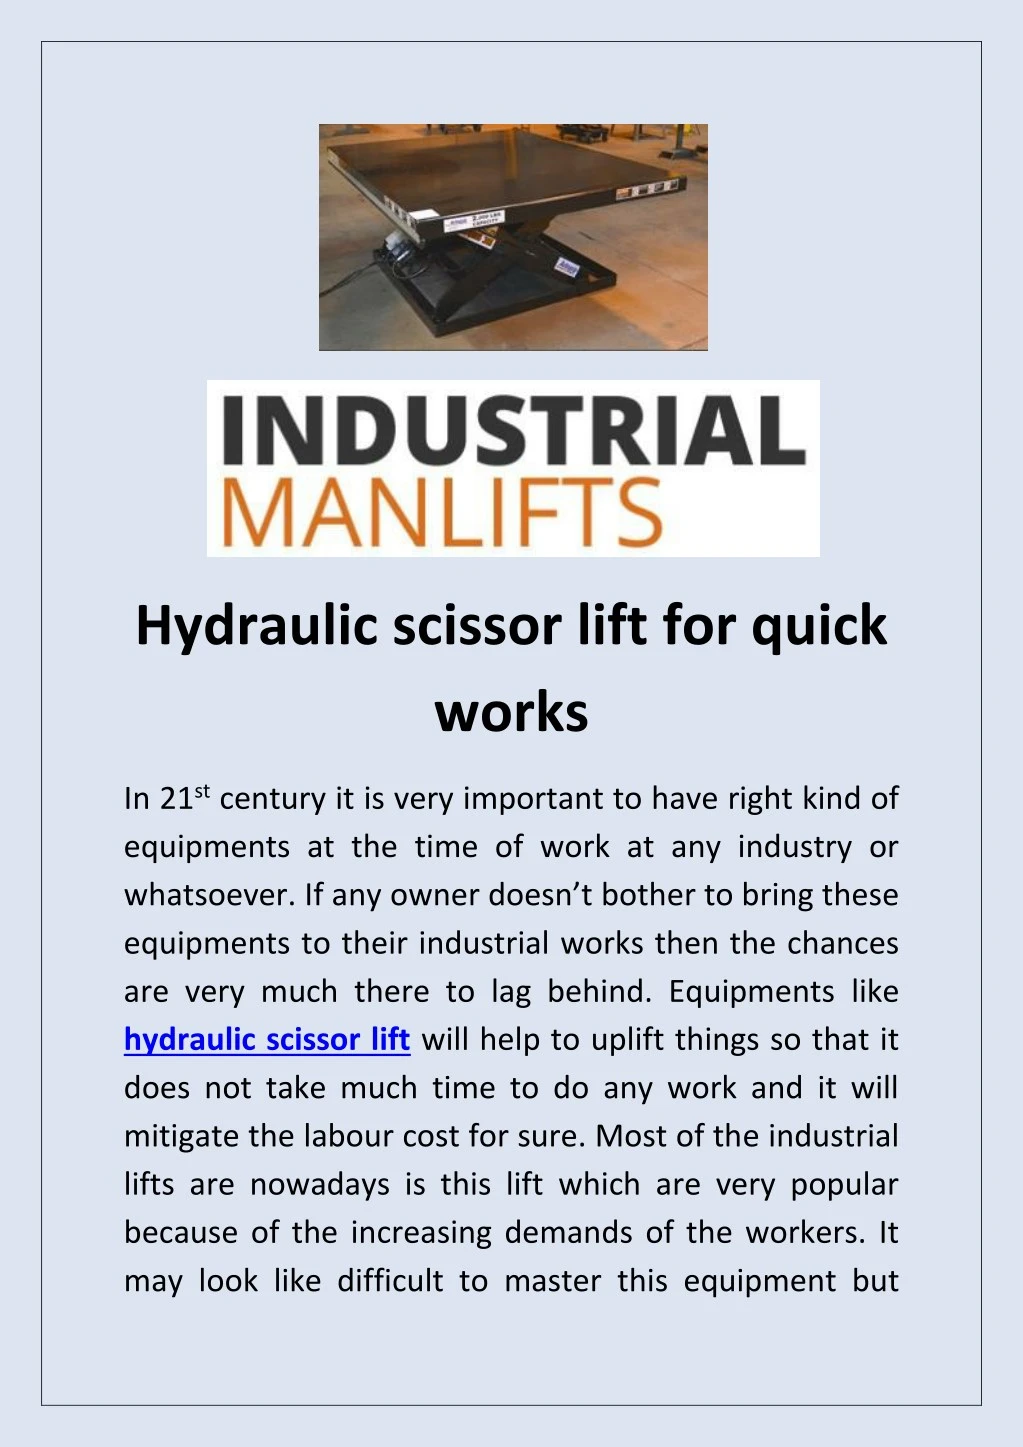 hydraulic scissor lift for quick works